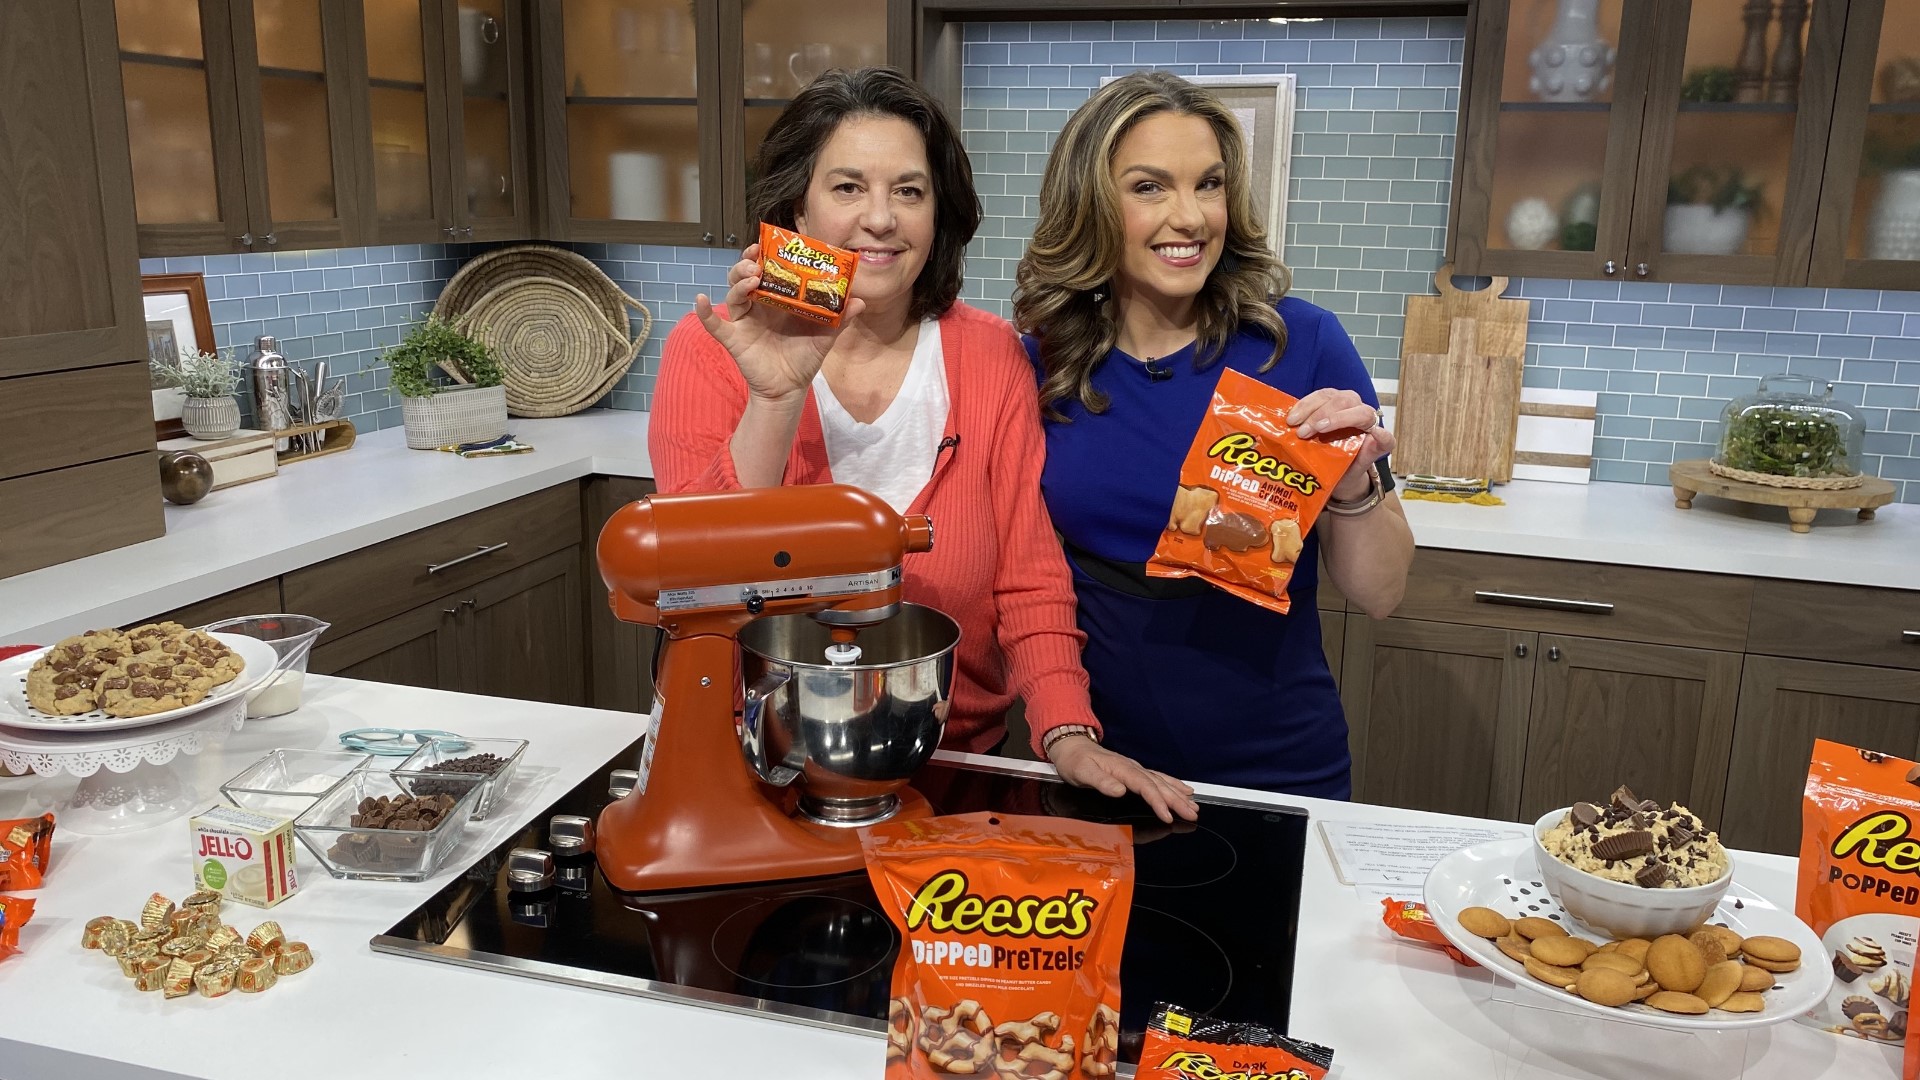 "I Love Reese's Day" is May 18, and we're celebrating with a delicious recipe of Reese's peanut butter cup cookies.